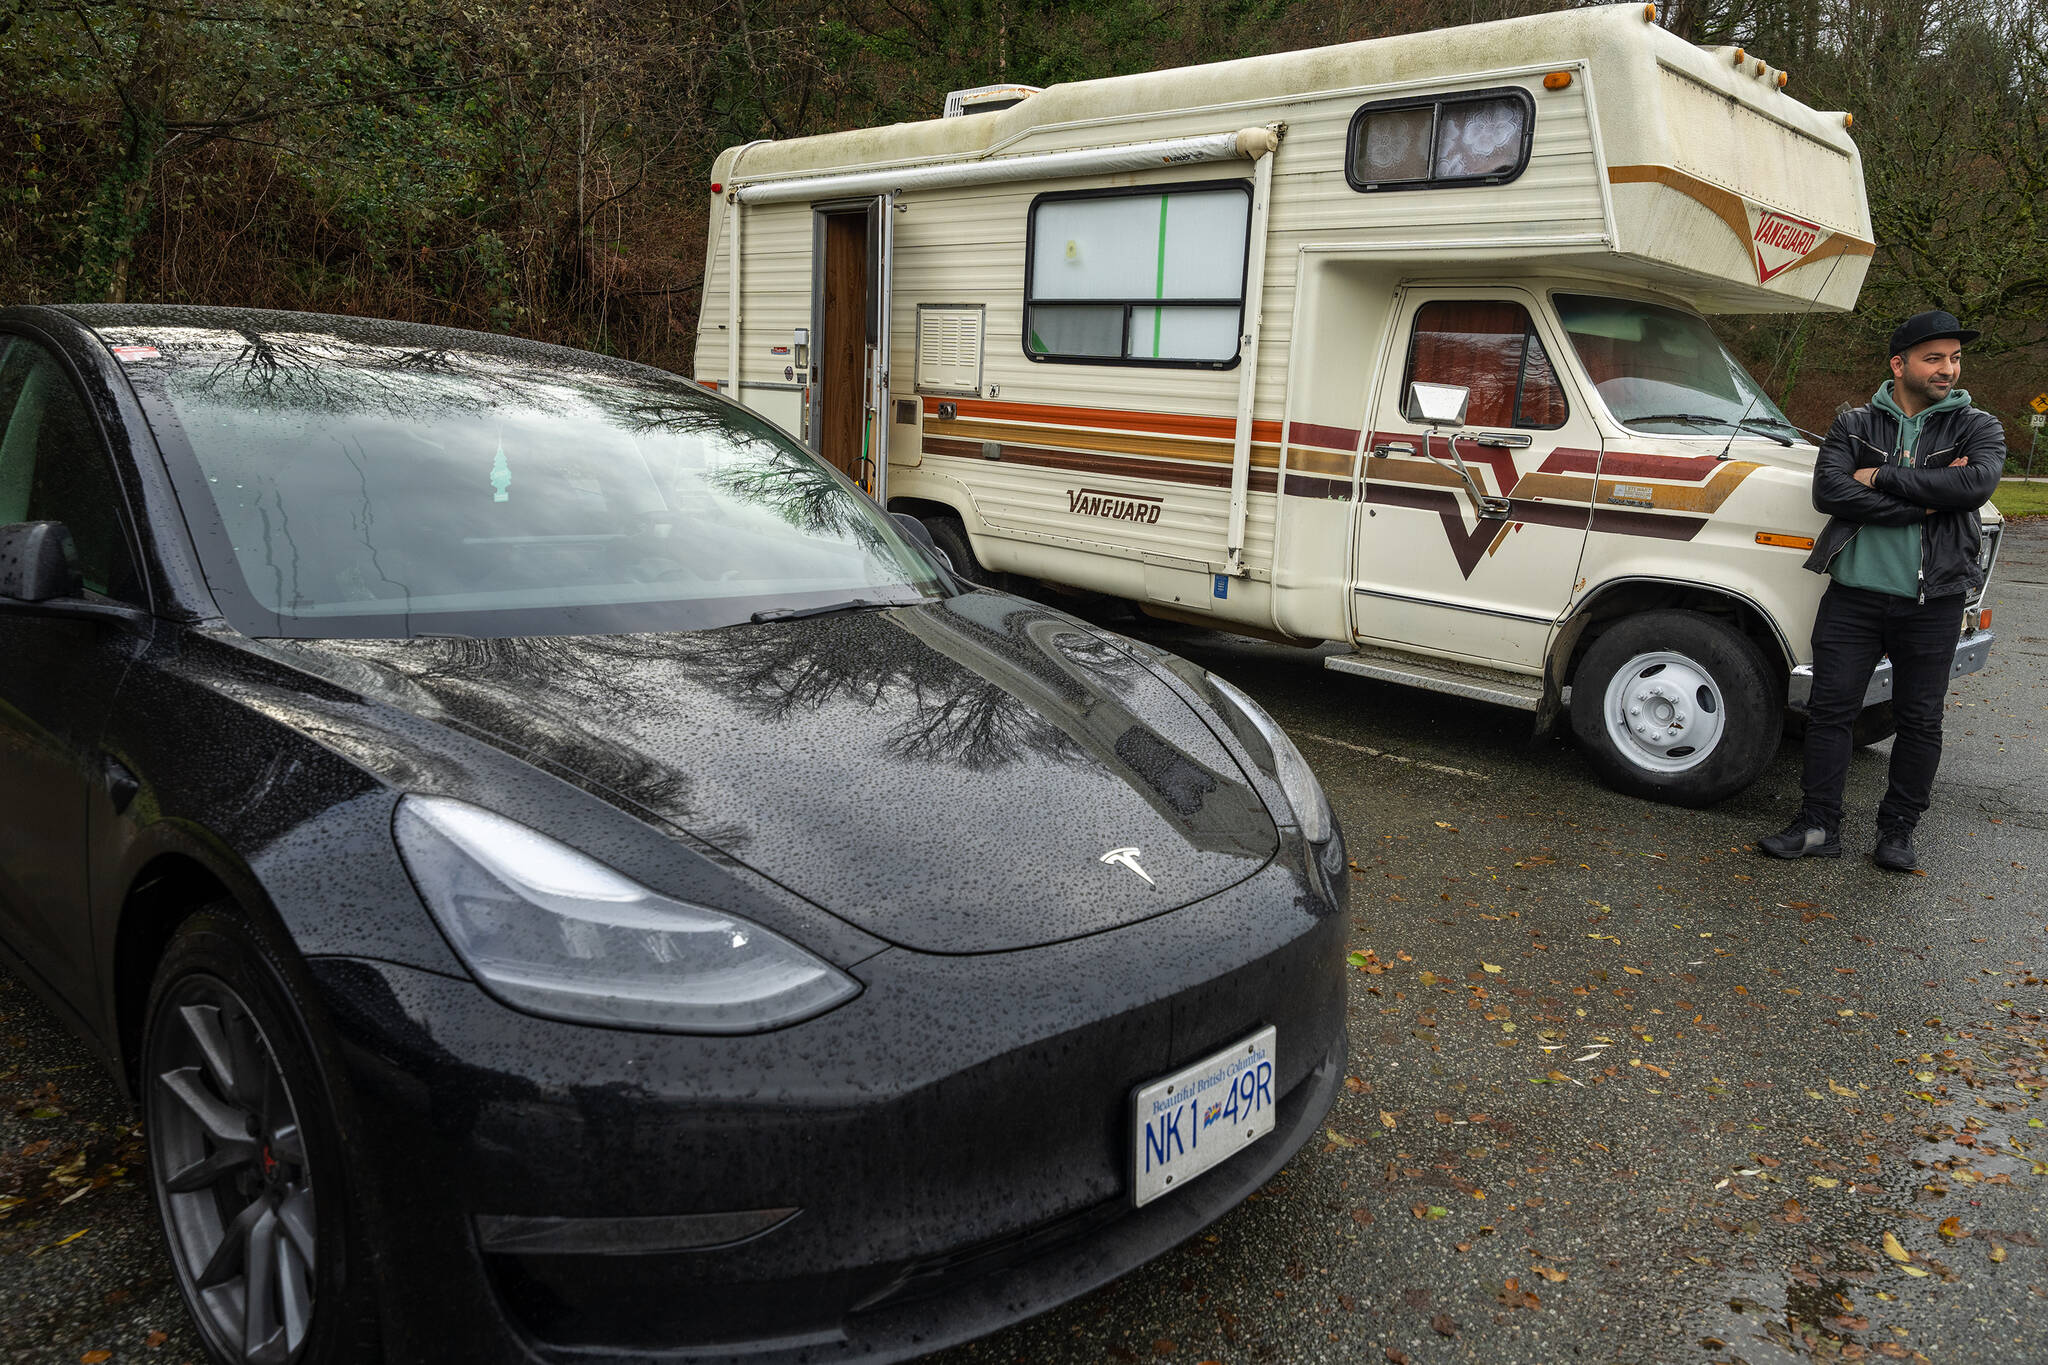 Lucas Philips is pictured outside of his camper and next to his Tesla where he lives in a parking lot in Spanish Banks, in Vancouver, B.C., Thursday, Dec. 8, 2022. Philips lives in a van but drives a Tesla, as part of Metro Vancouver’s growing camper community. THE CANADIAN PRESS/Jonathan Hayward